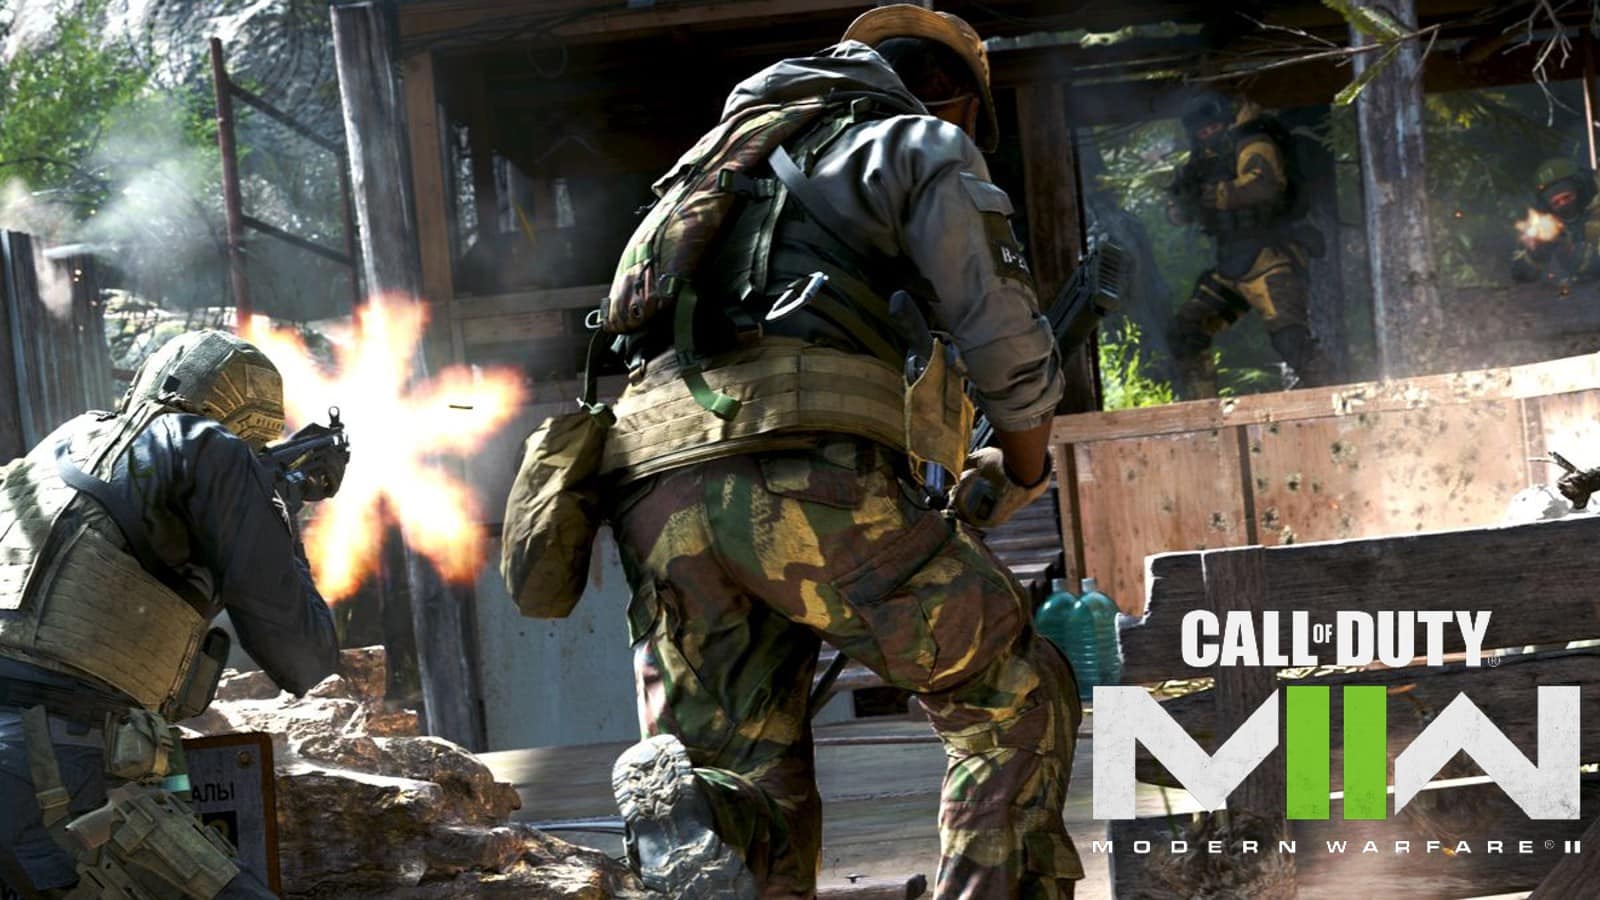 Call of Duty: Modern Warfare Review - The return of a classic